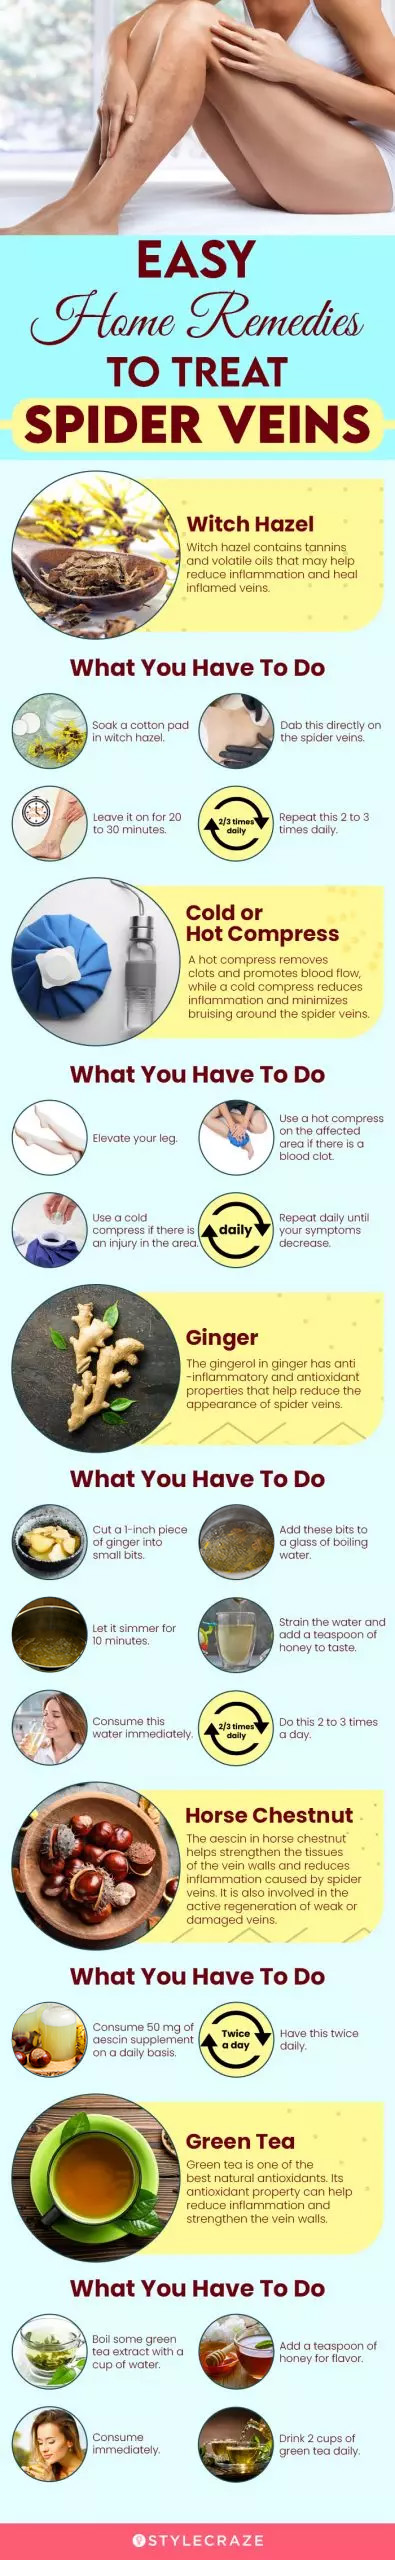 easy home remedies to treat spider veins (infographic)